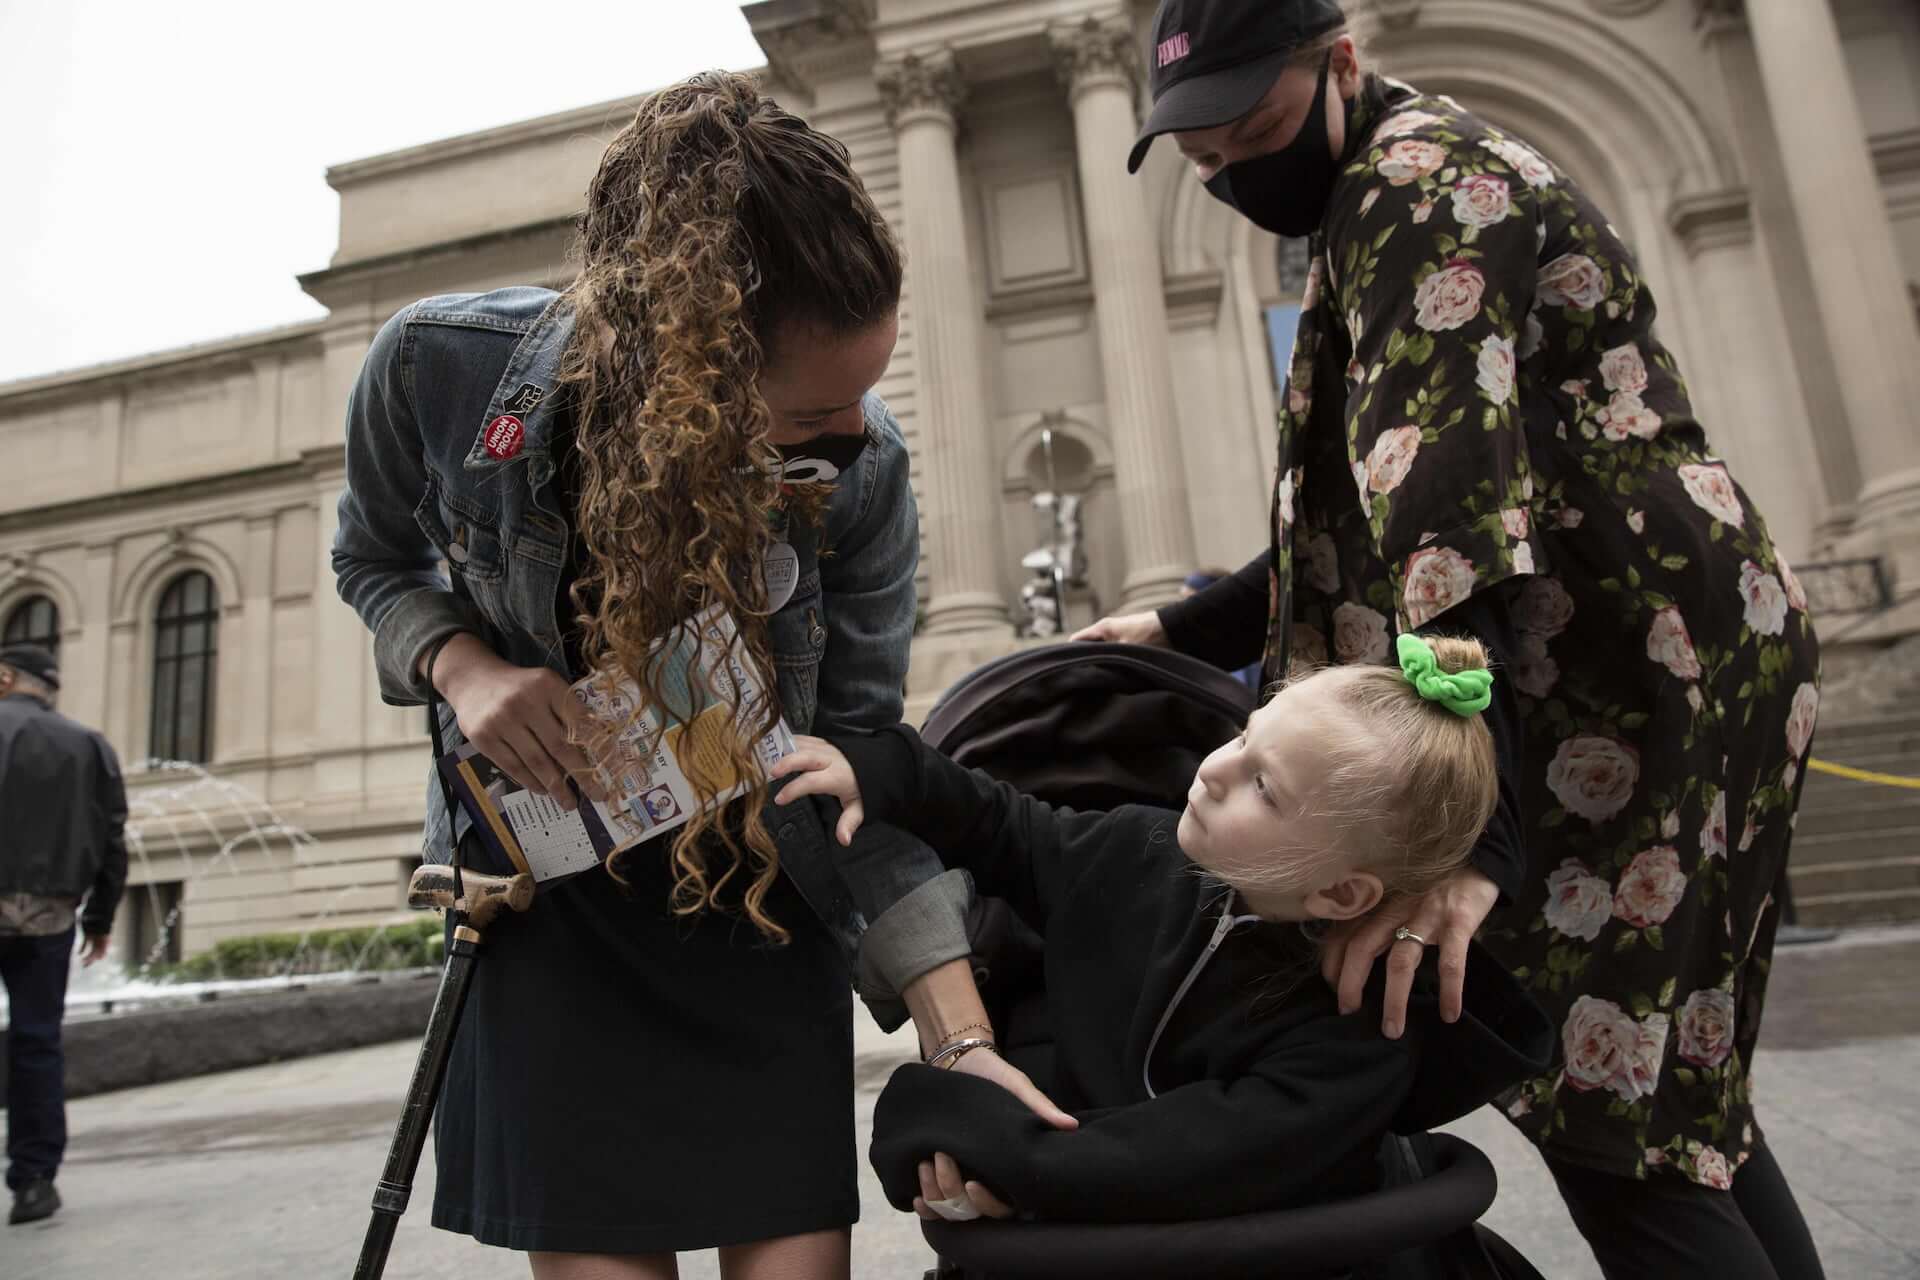 Rebecca bends down to talk to a disabled girl in a stroller and her mother, in front of the Metropolitan Art Museum.